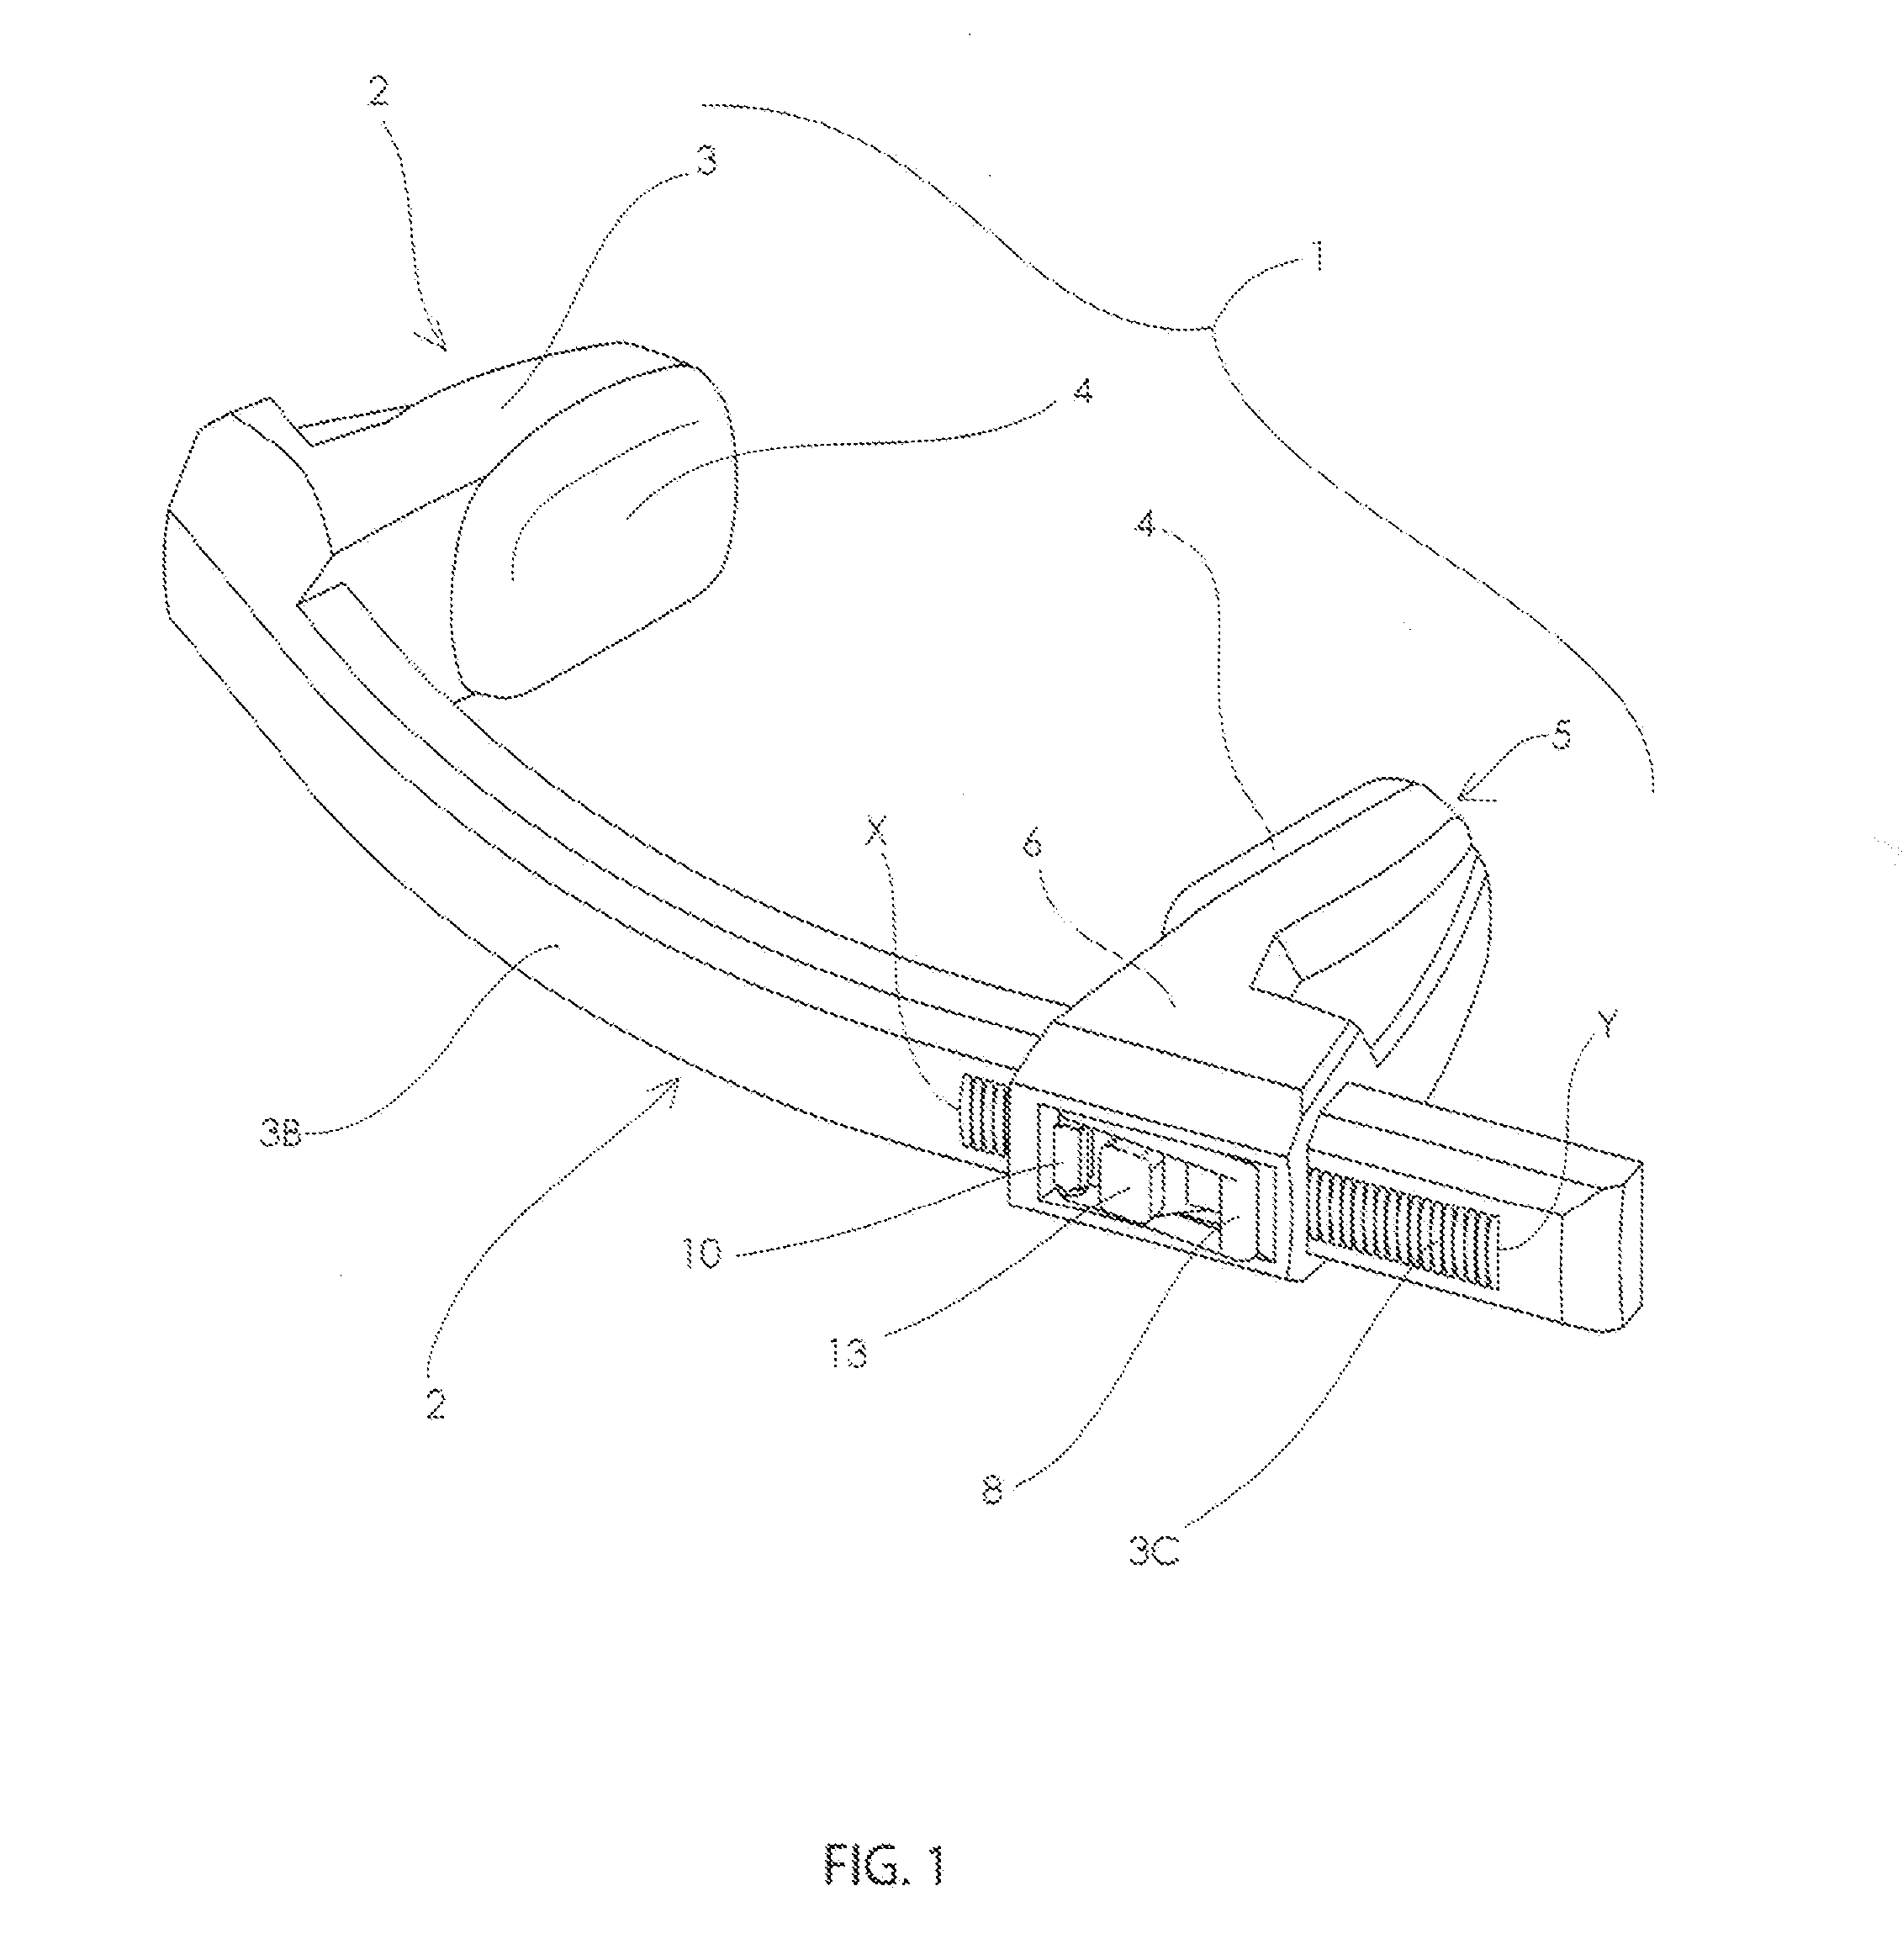 Apparatus for stabilization of pelvic fractures